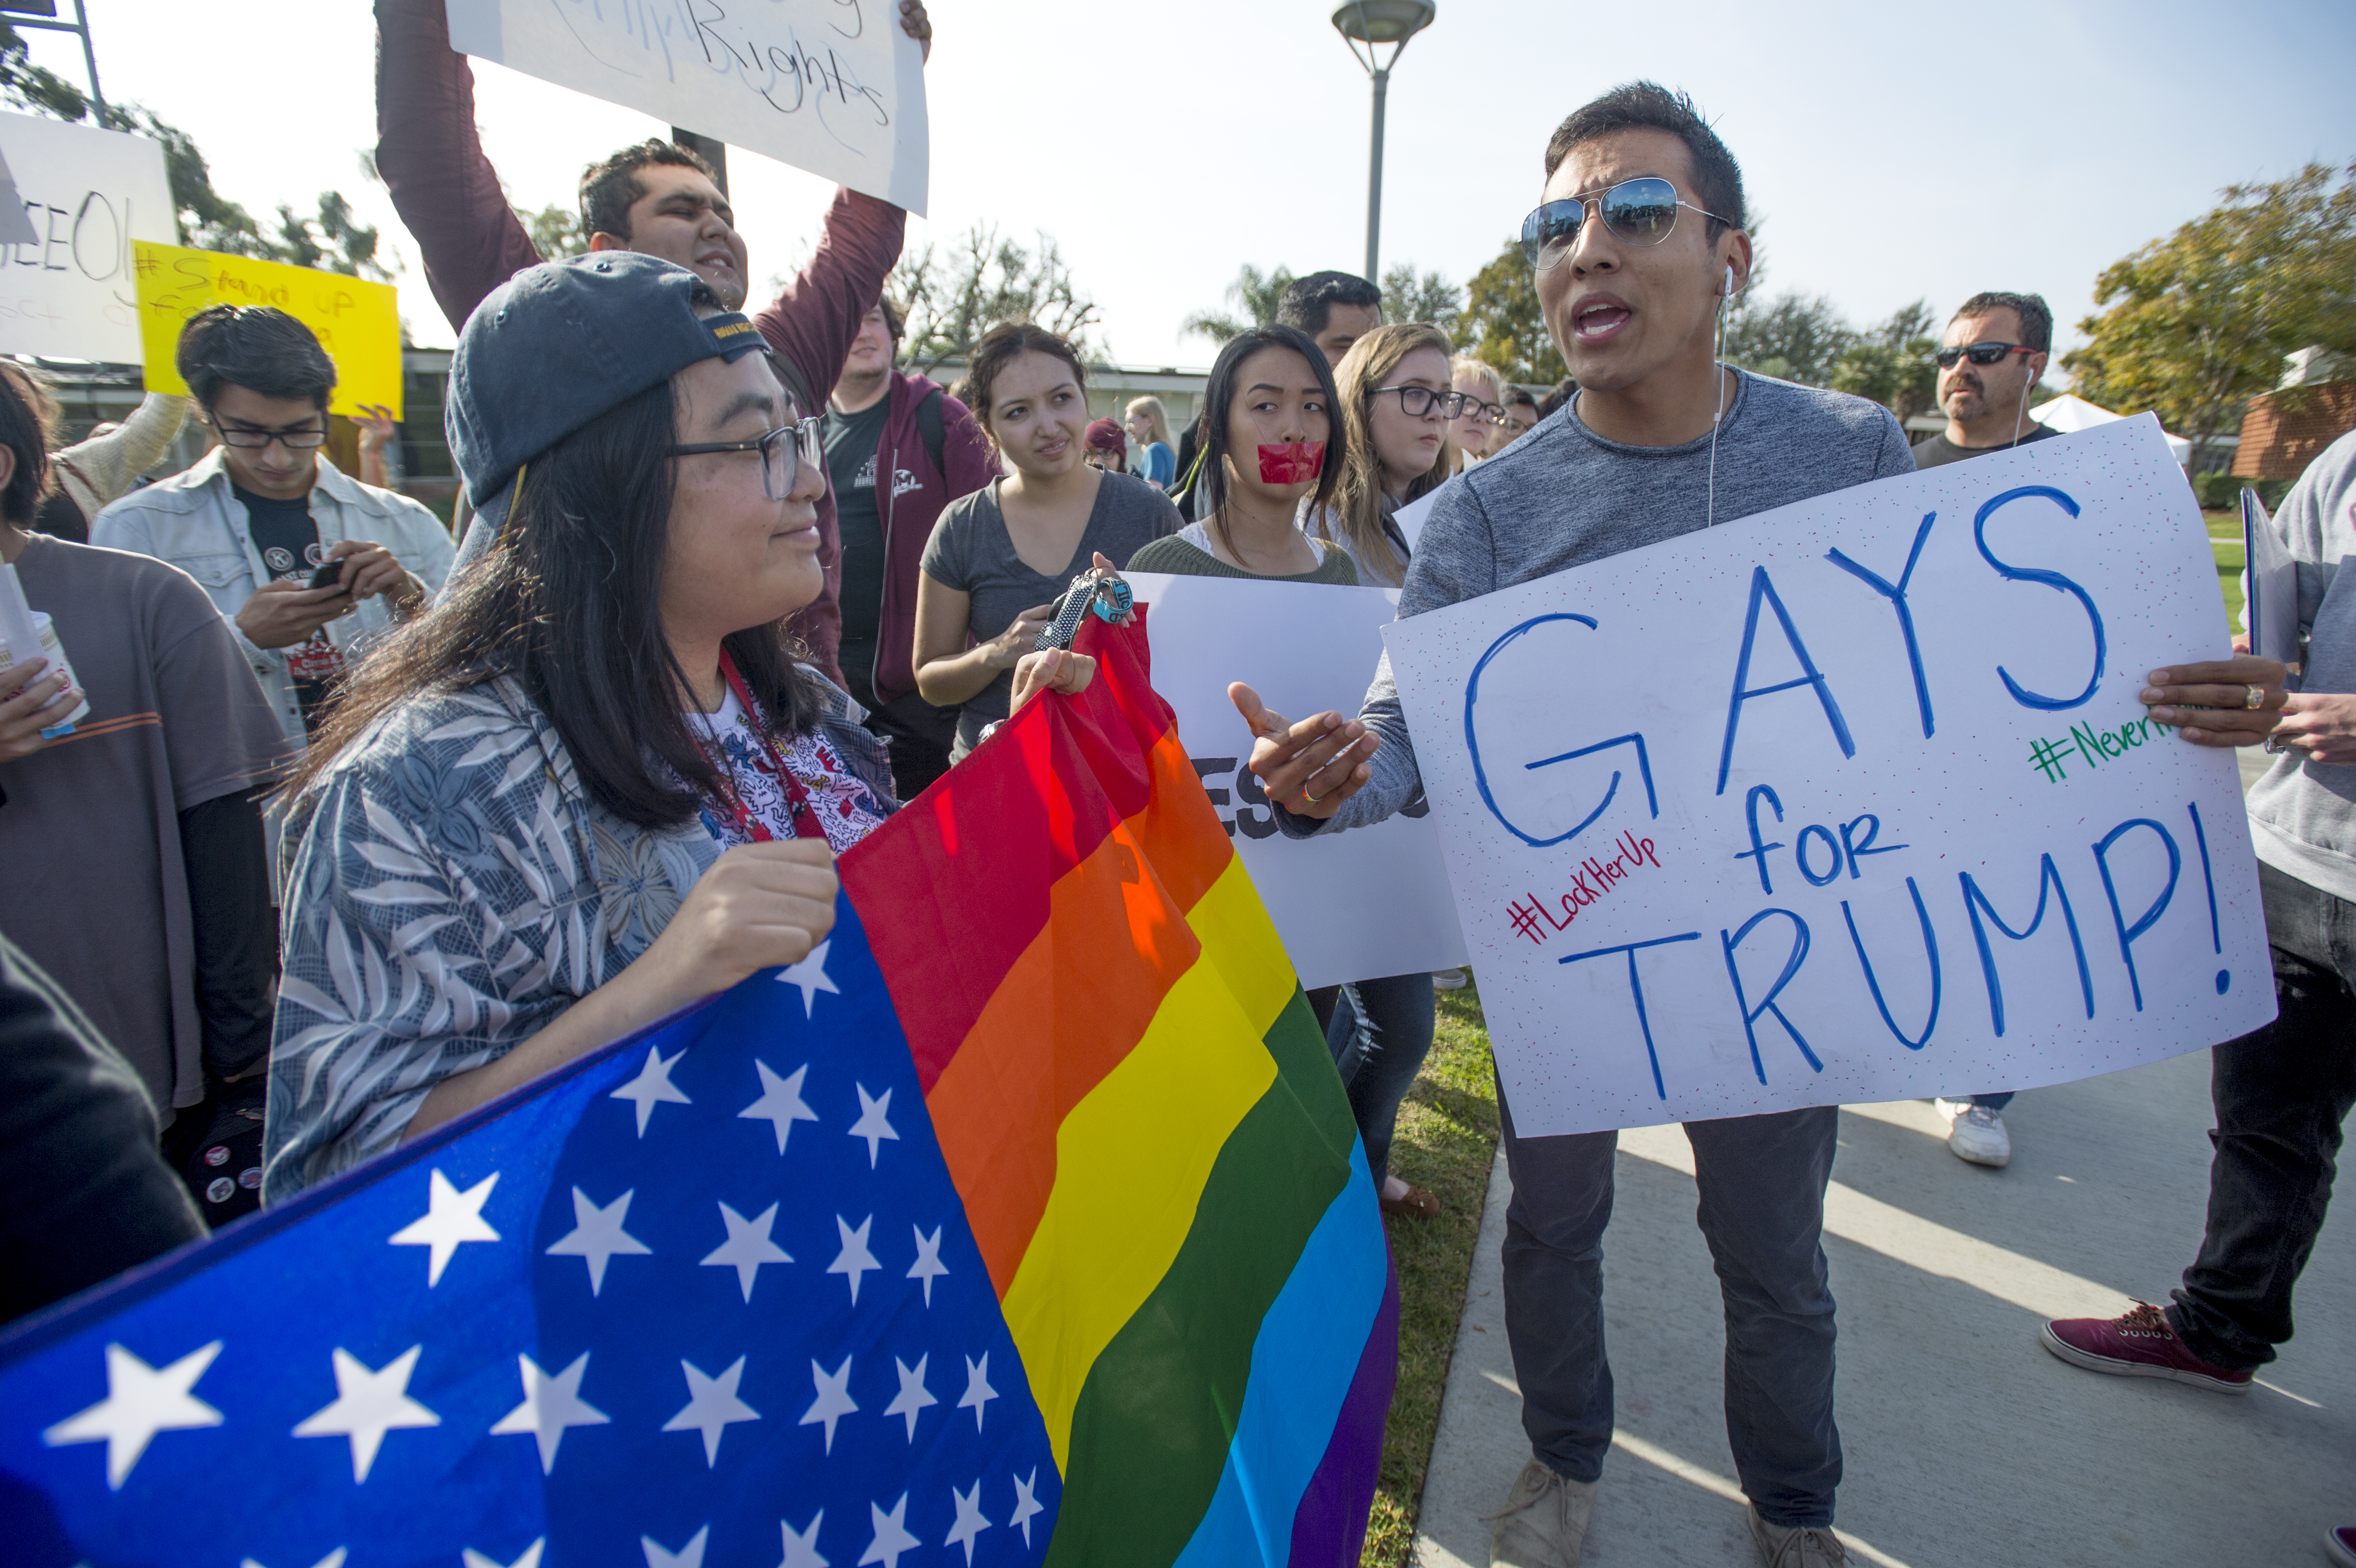 A protester carrying a rainbow-striped American flag looks at a counterprotester carrying a sign that reads, “Gays for Trump.”